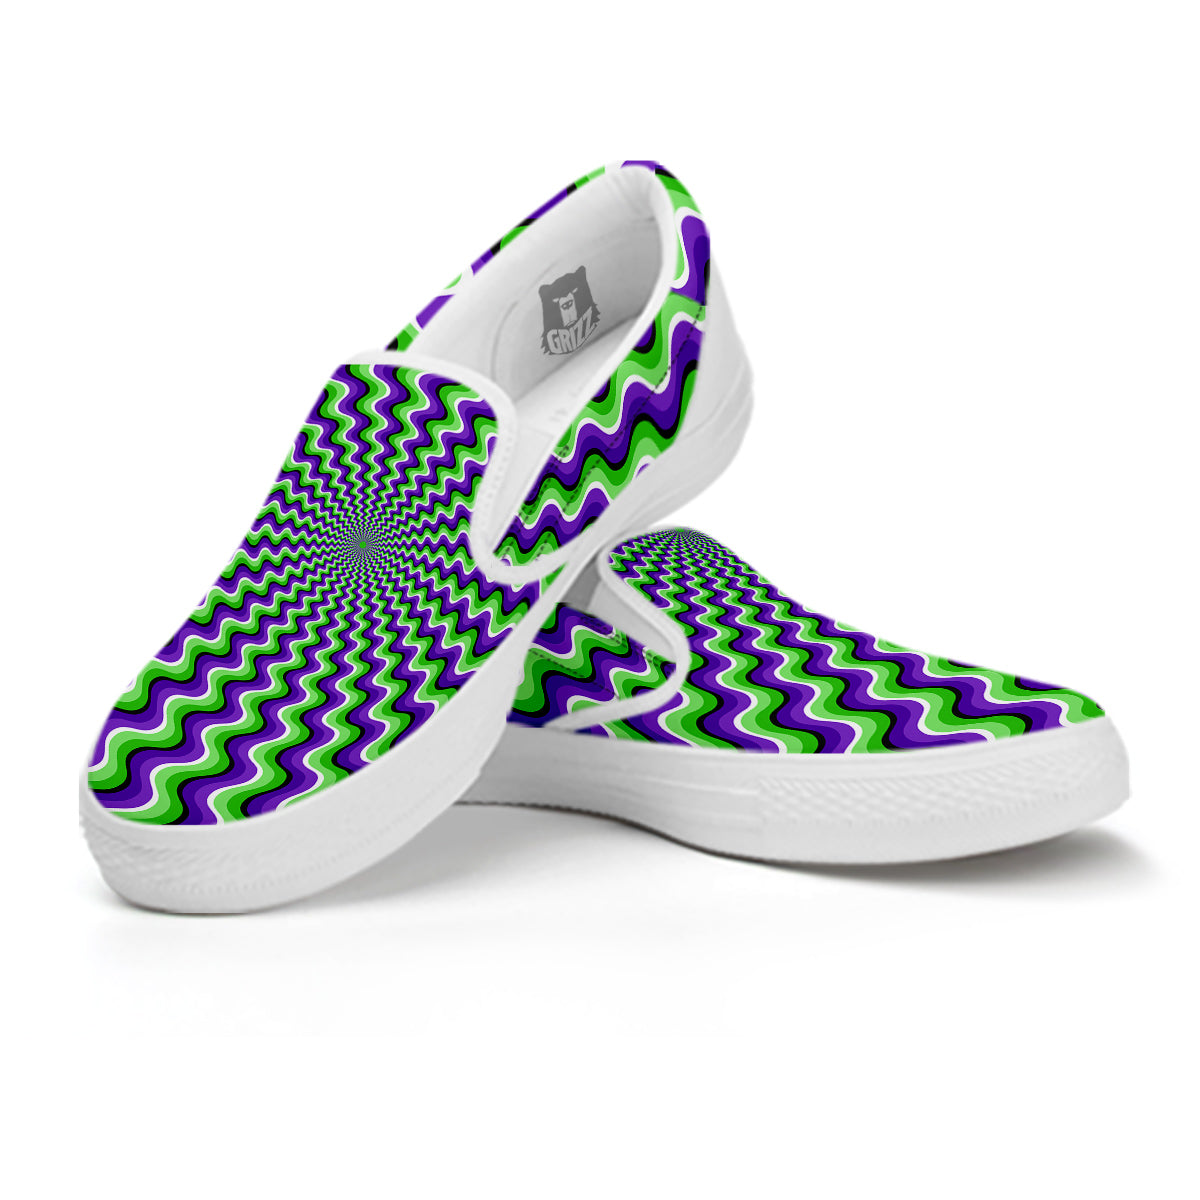 verdieping meisje schermutseling Moving Optical Illusion Colorful Dizzy White Slip On Shoes – Grizzshopping